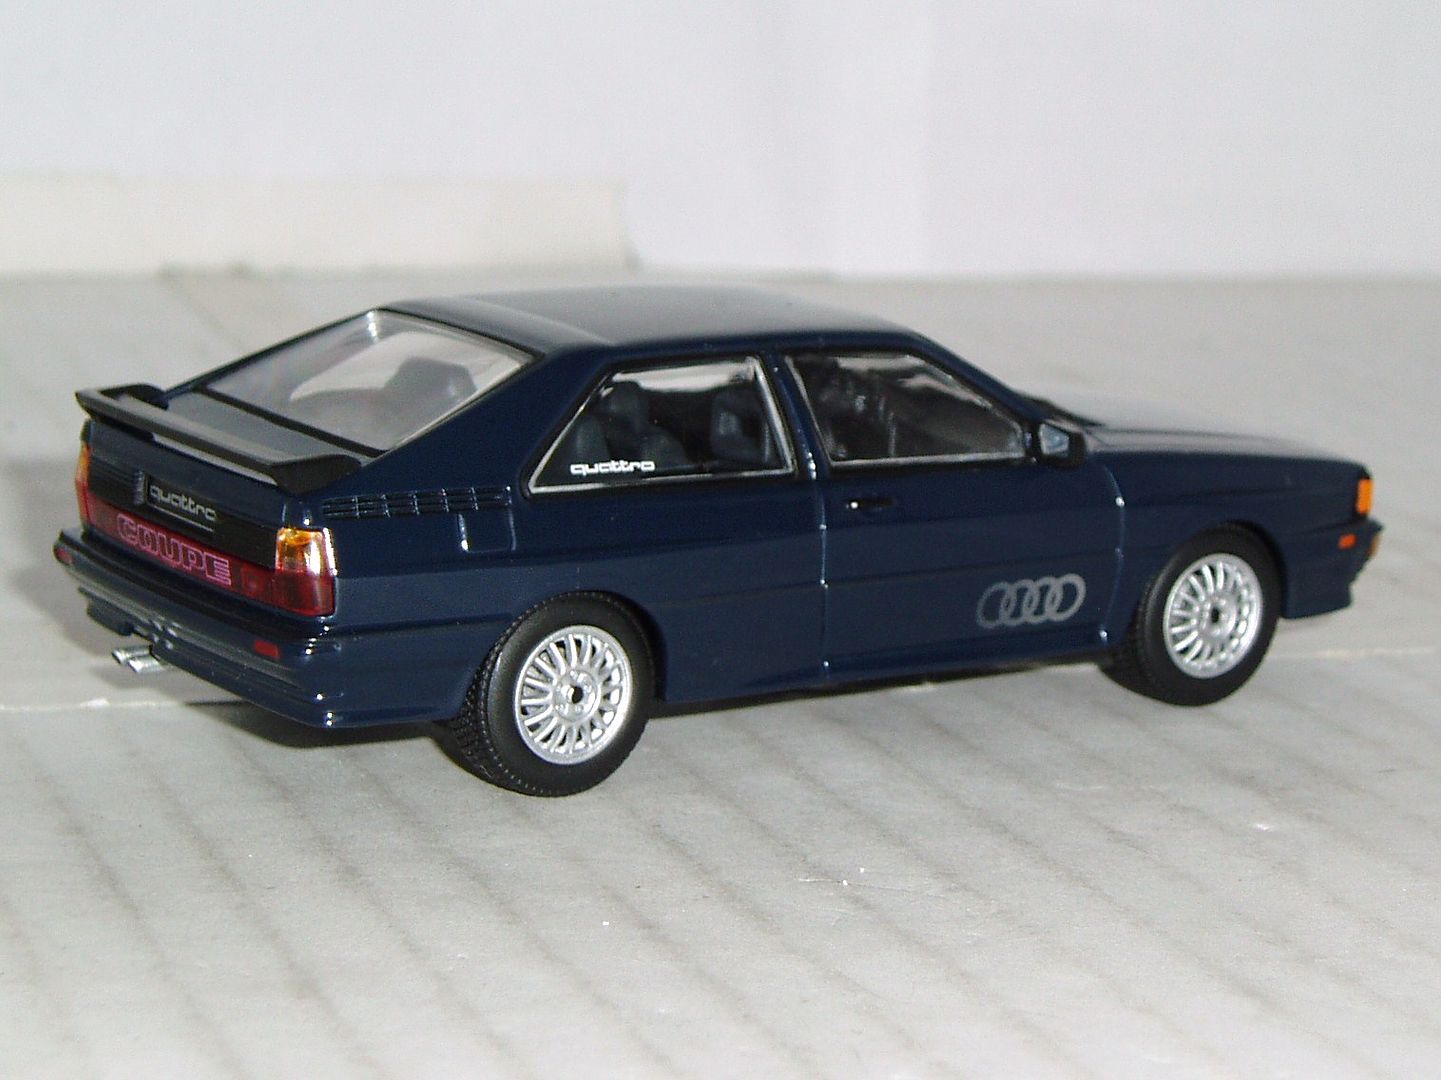 Scalainj S 1 43 Collection Dx 1 43 And Smaller Collectors Diecastxchange Com Diecast Cars Forums